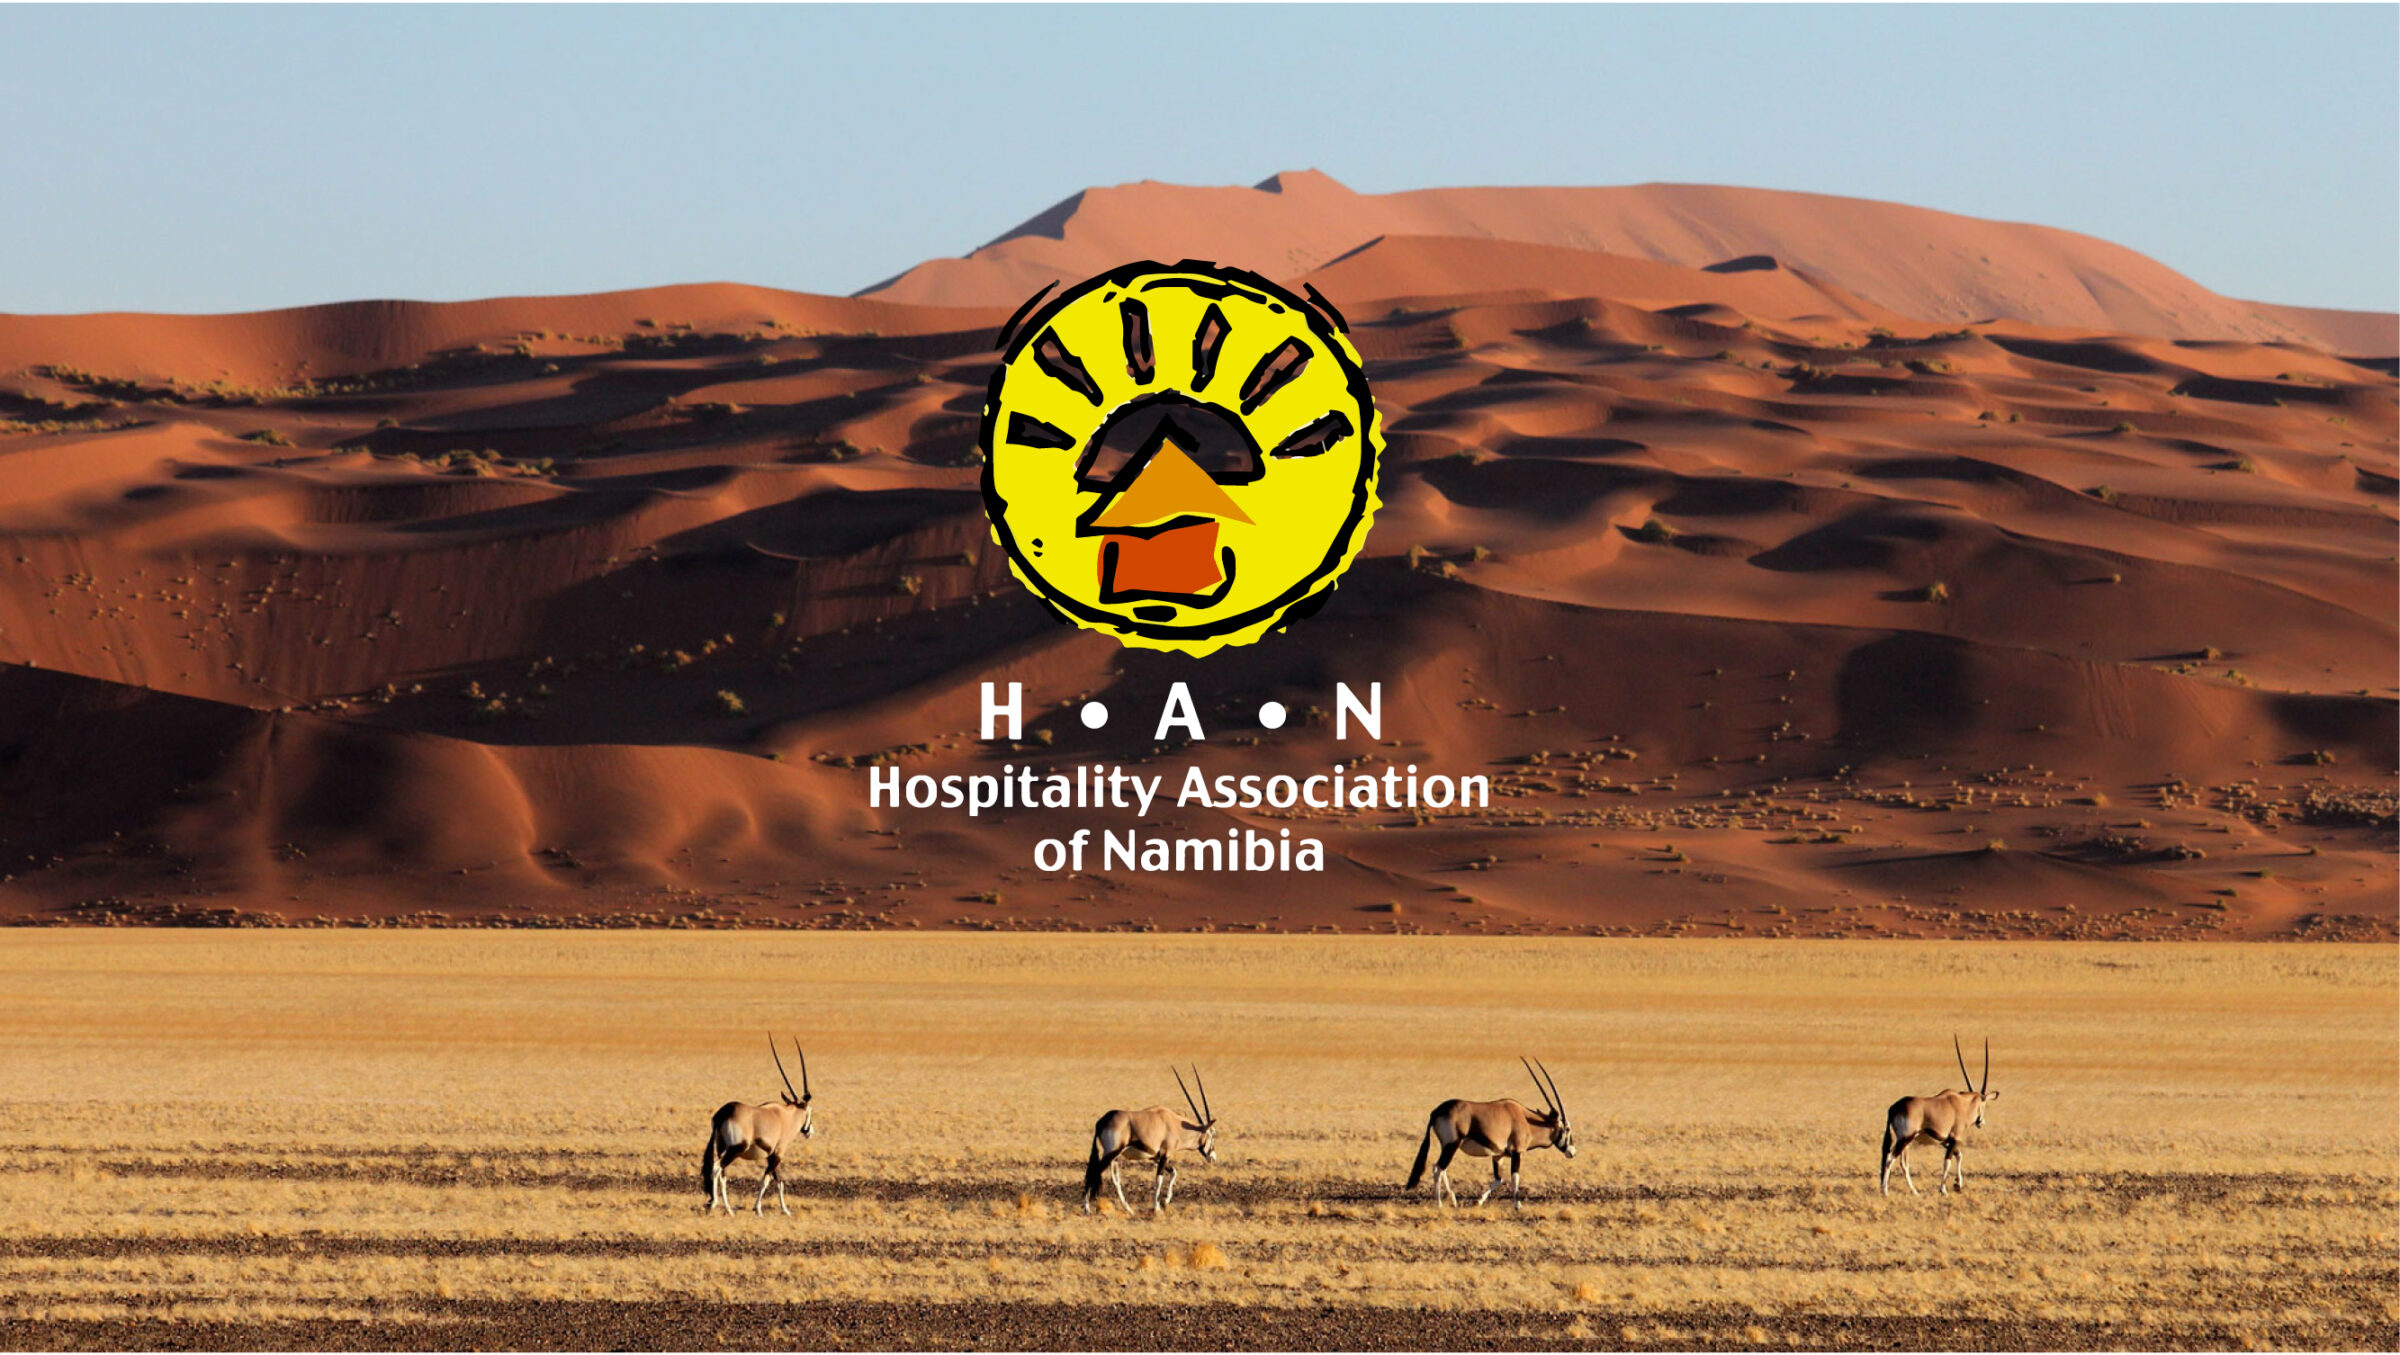 Featured image for “CiMSO INNkeeper, member of the Hospitality Association of Namibia (HAN)”